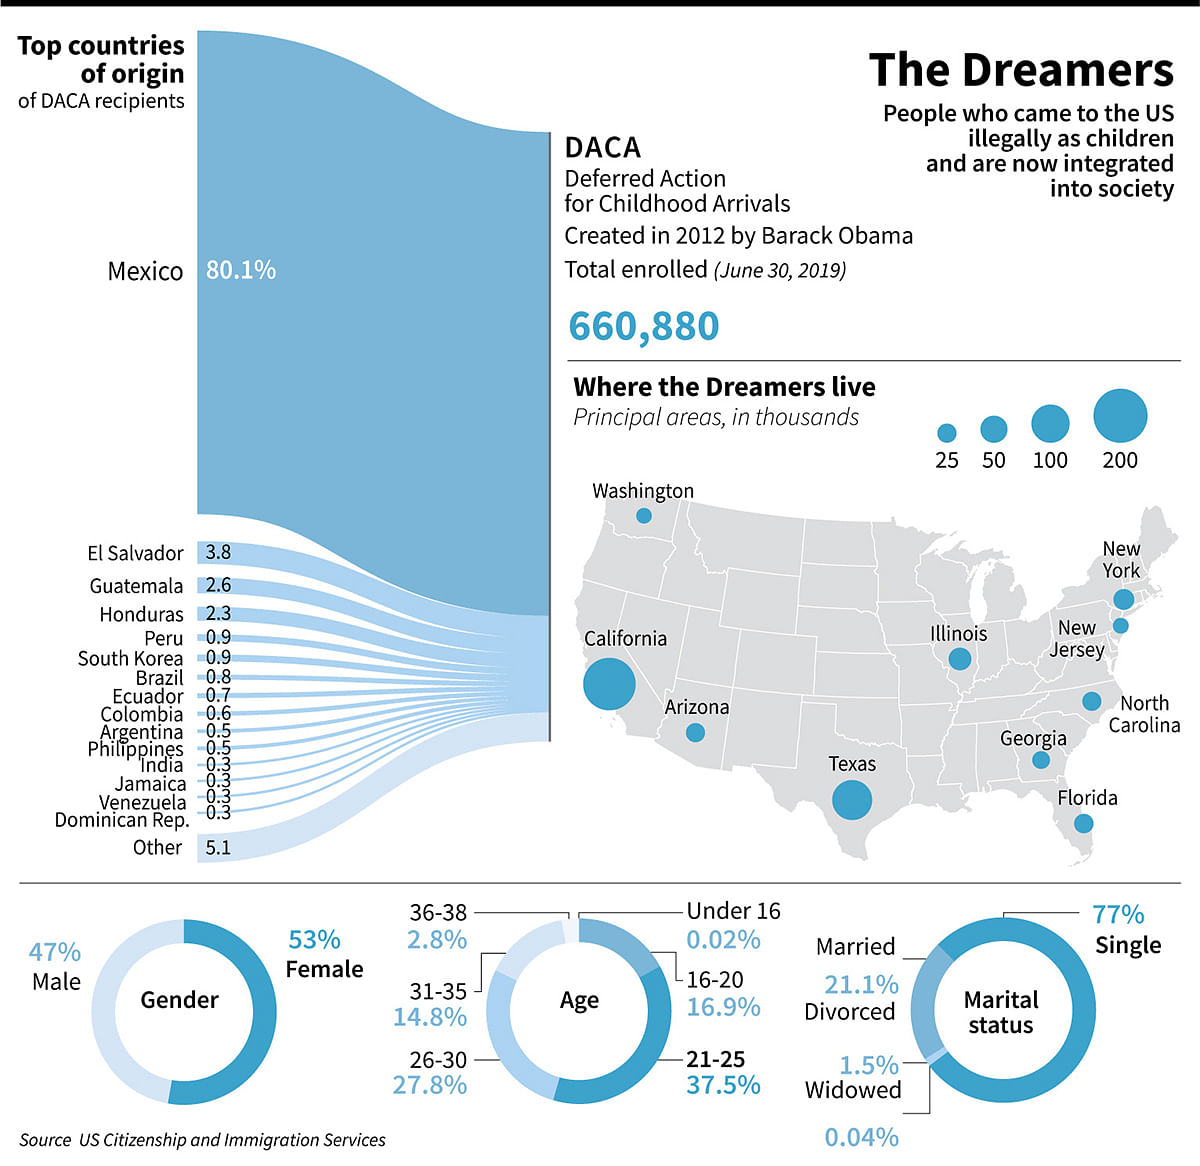 Key figures on the `Dreamers`, the people who arrived illegally in the US as children and are now integrated into the society. Photo: AFP